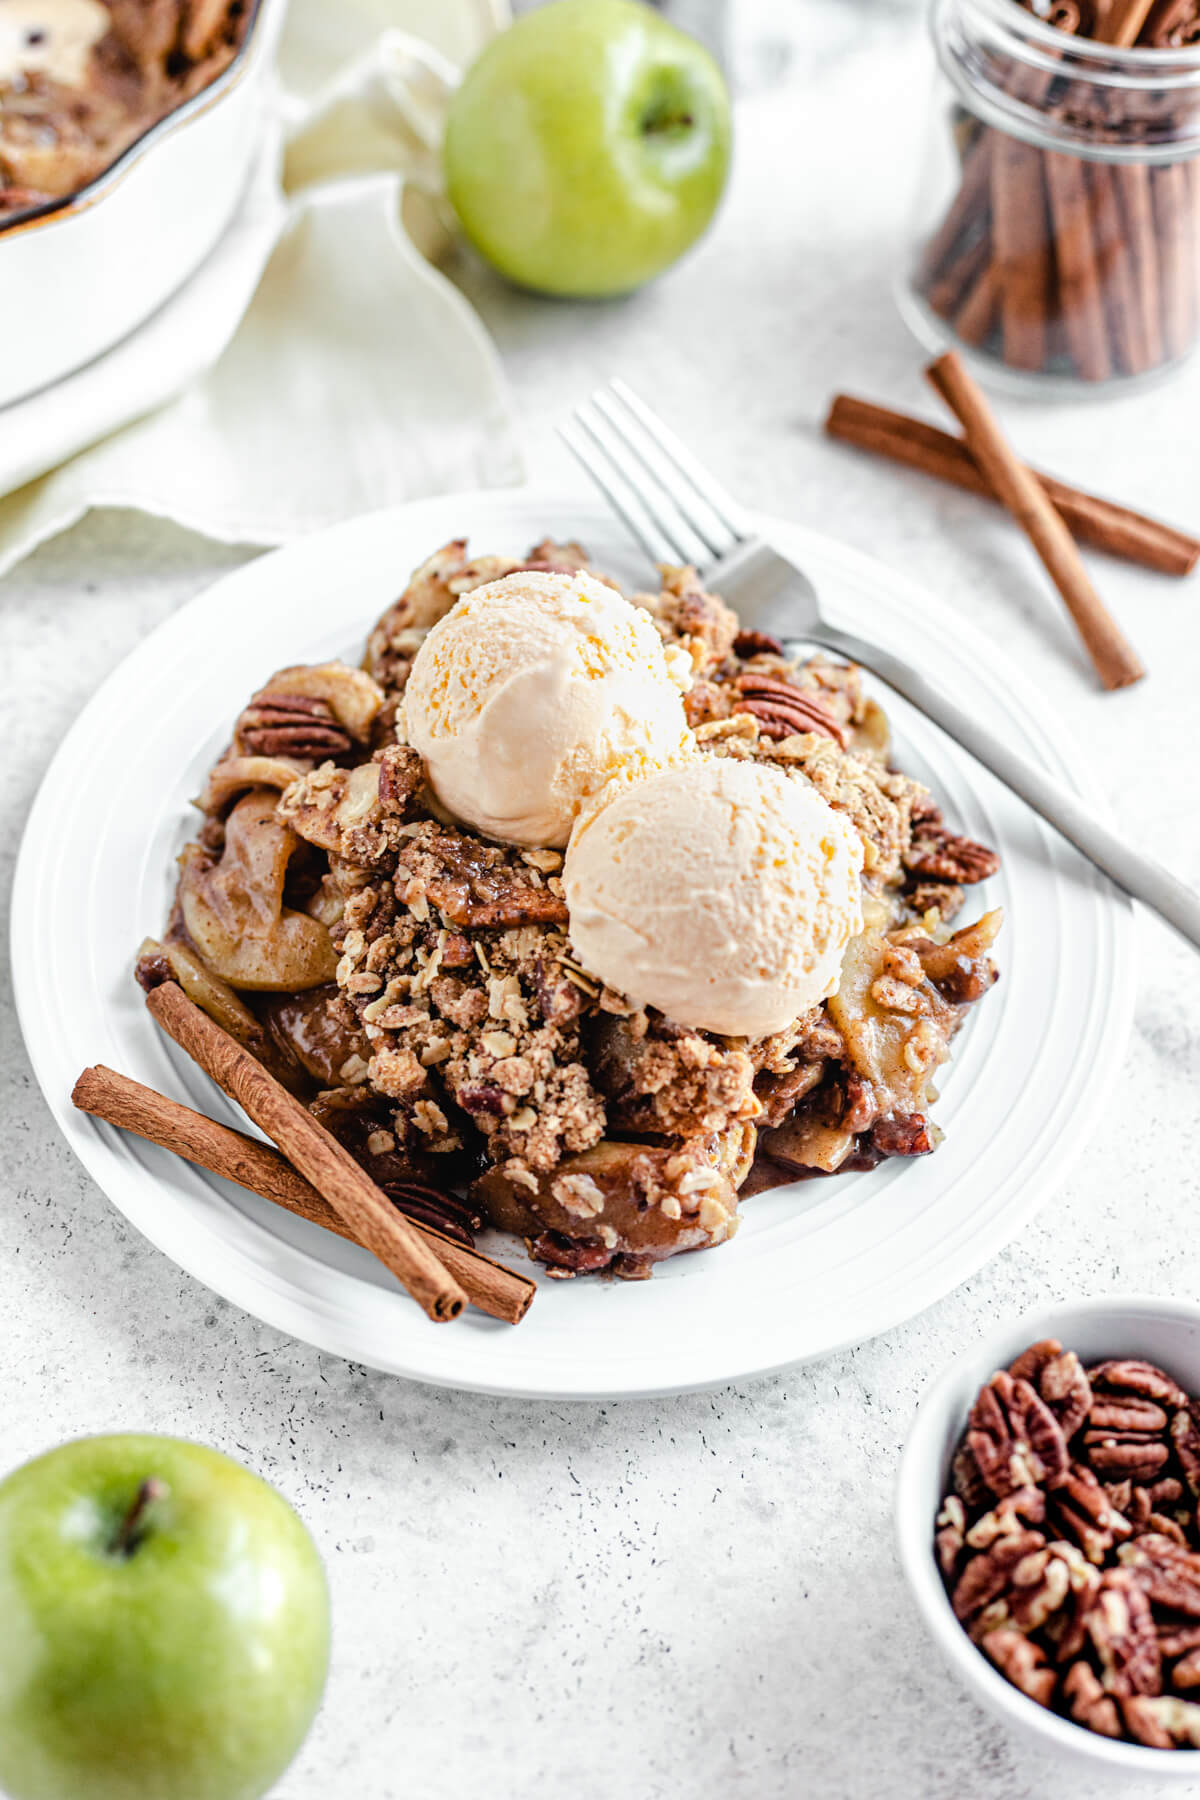 apple crisp in a white plate topped with two scoops of ice cream